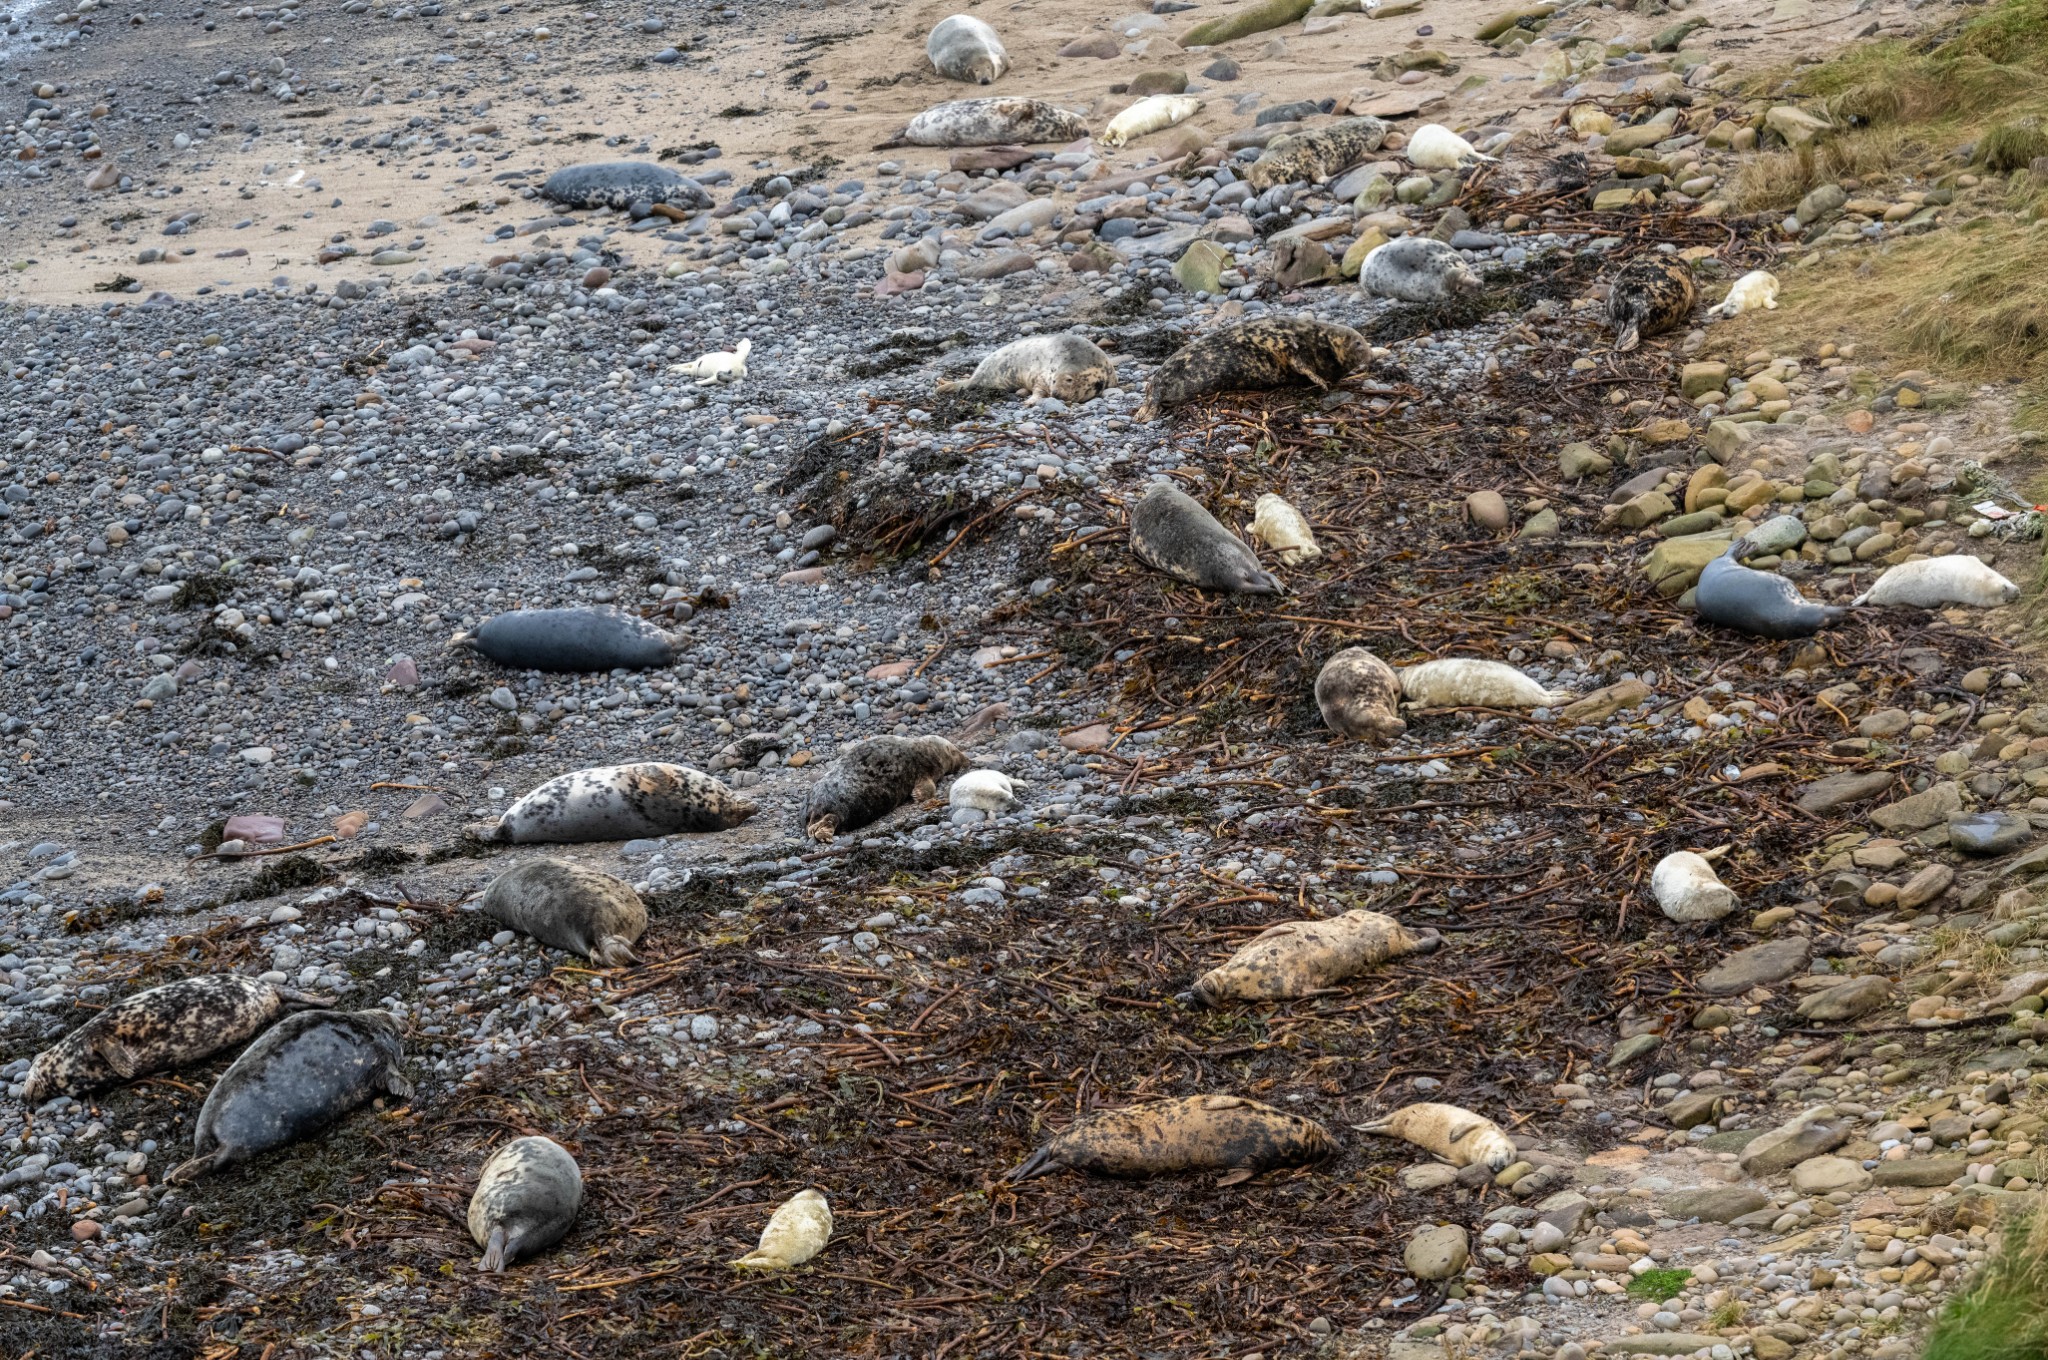 Grey seals and their pups in Orkney - image by Raymond Besant